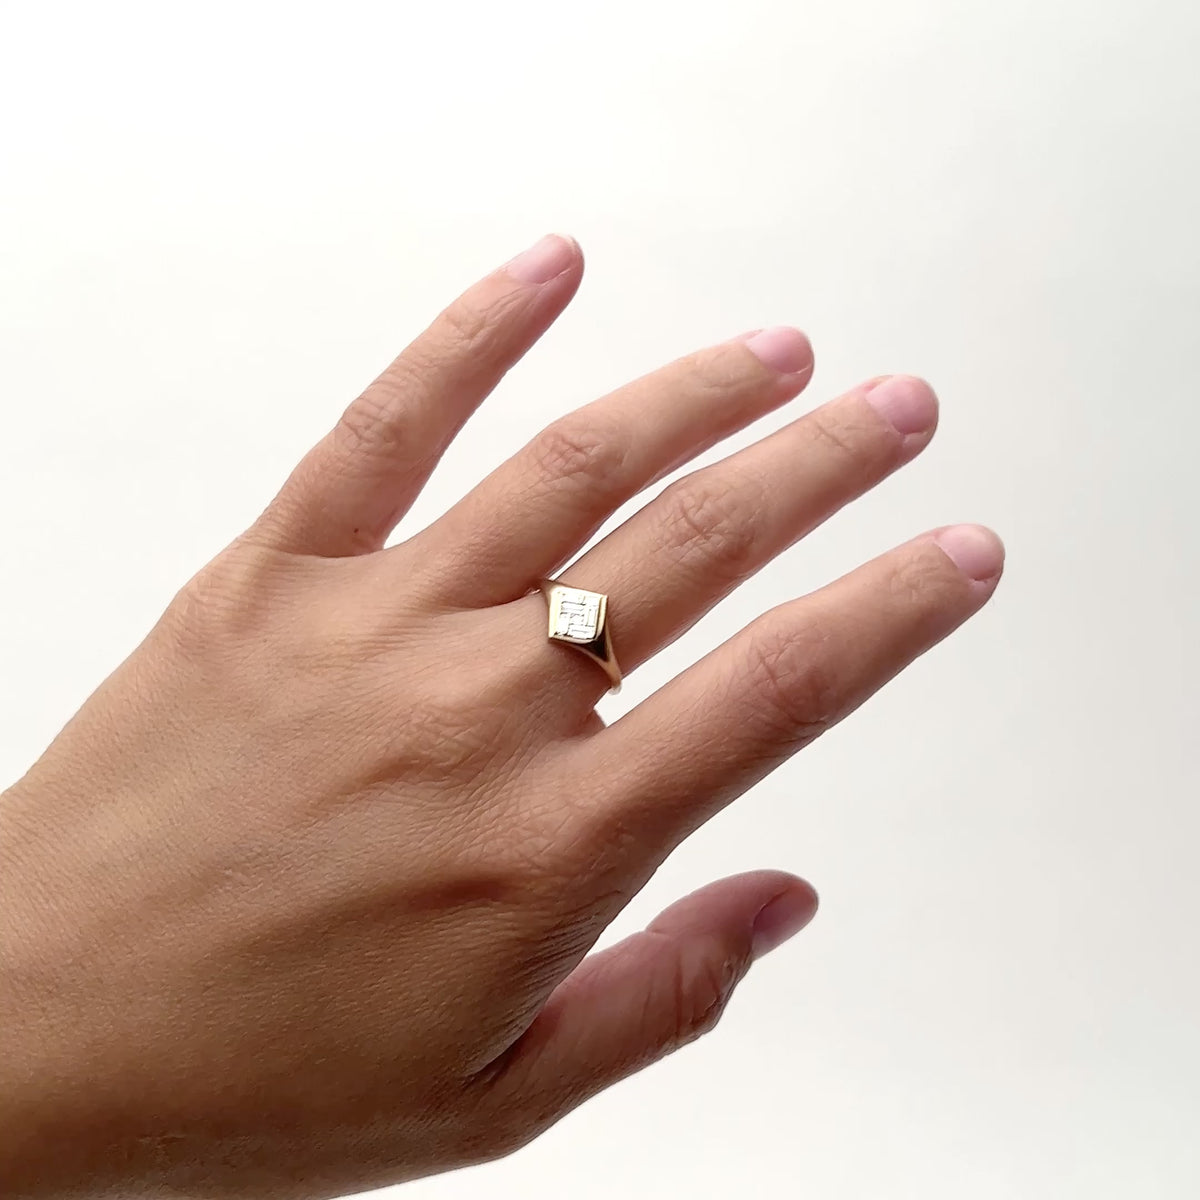 An offset square 14k gold ring with a square patchwork of white baguette diamonds. The model rates their hand from side to side with the ring on the middle finger. The Elicio ring is designed and handcrafted in Portland, Oregon.